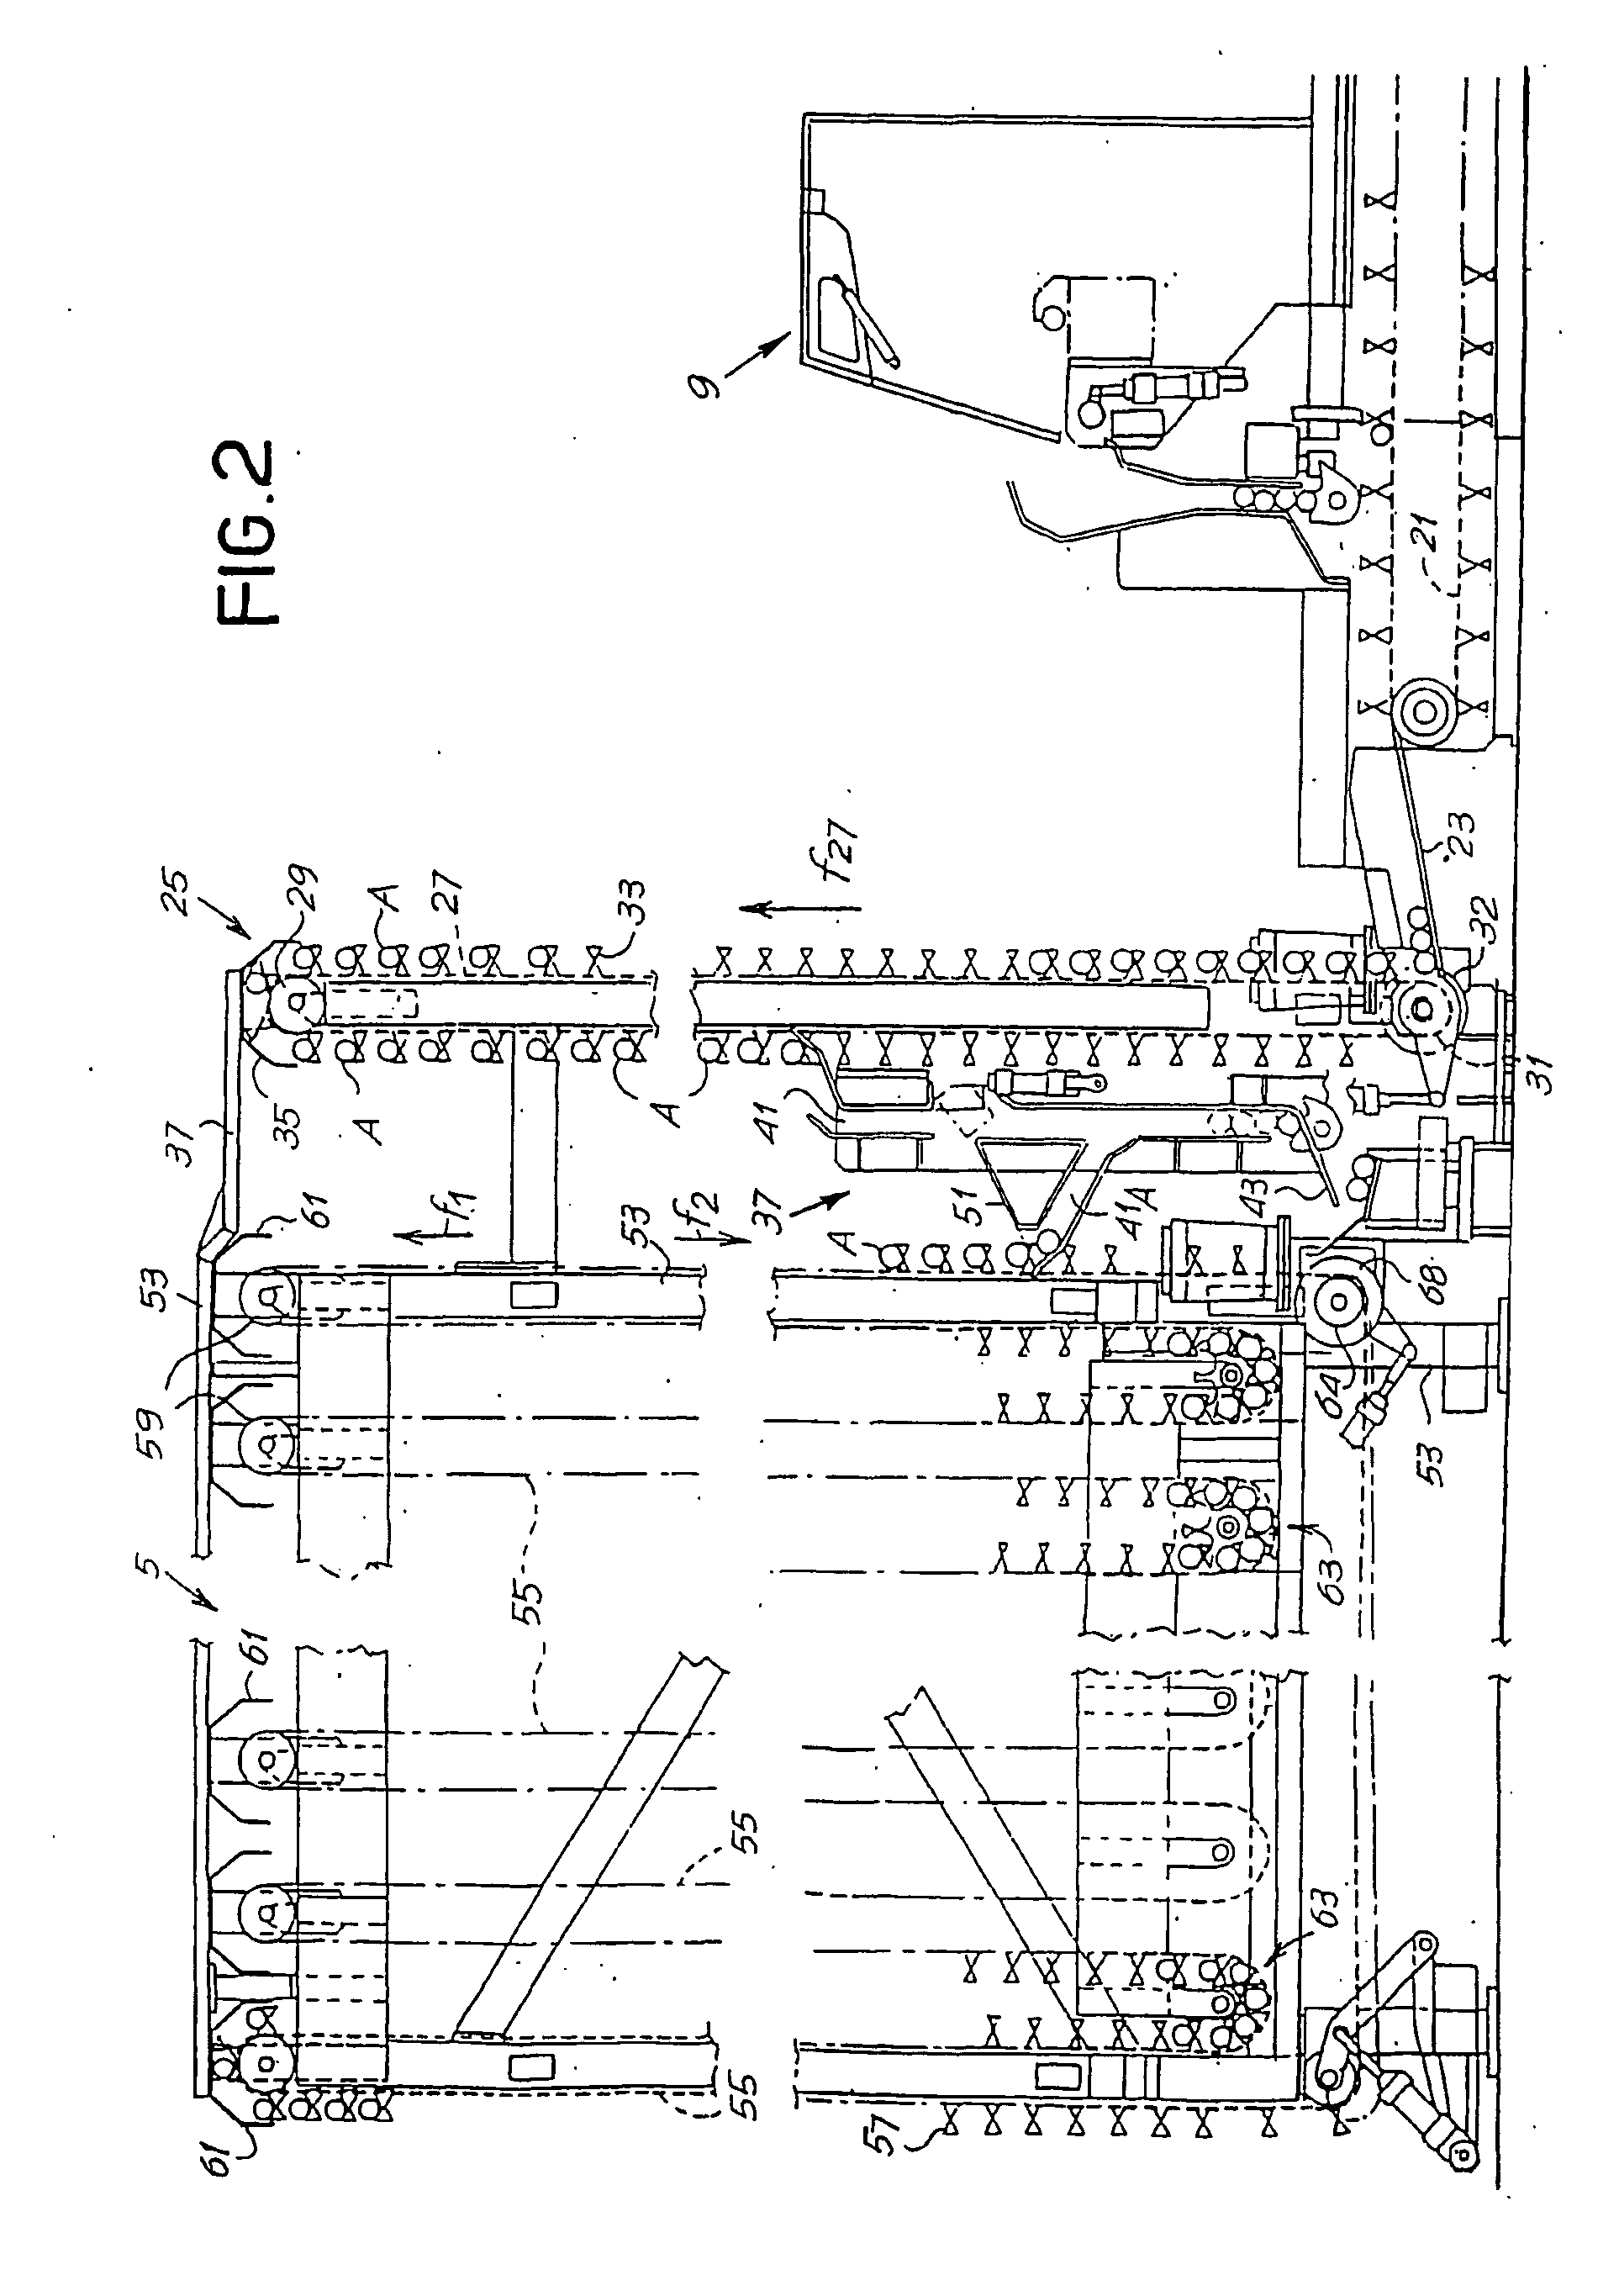 Accumulator for elongated products, such as tubes and the like